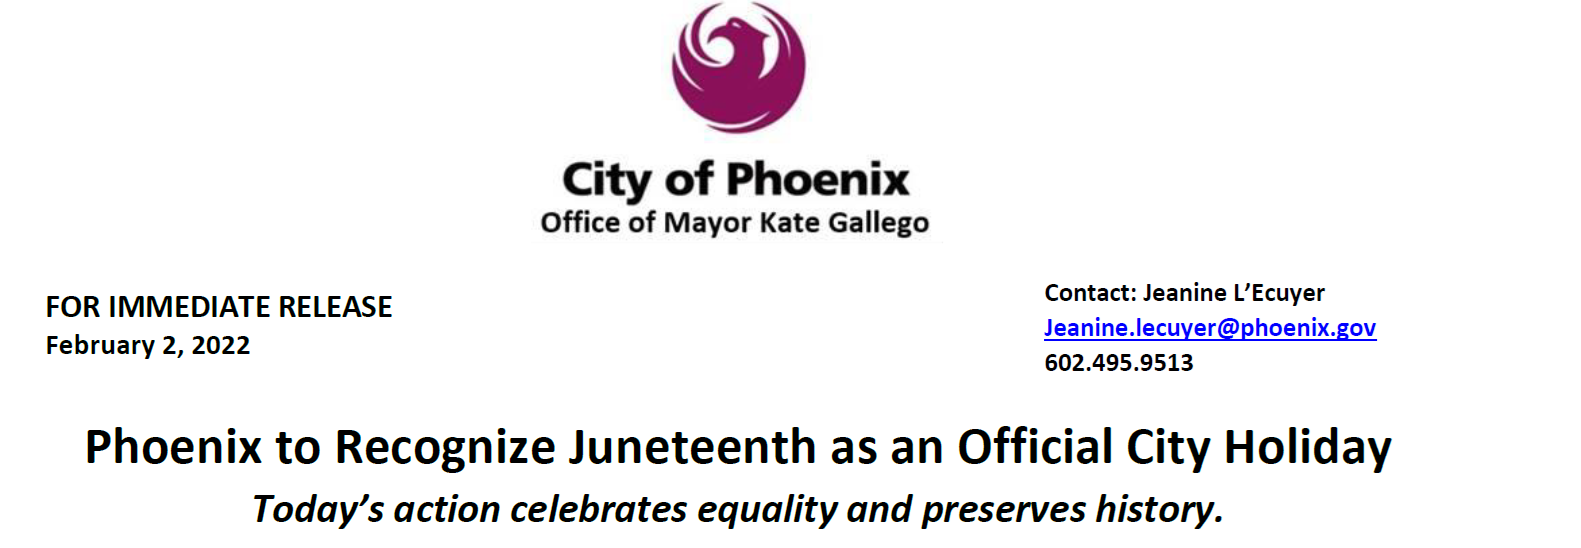 PHOENIX RECOGNIZES JUNETEENTH AS AN OFFICIAL CITY HOLIDAY